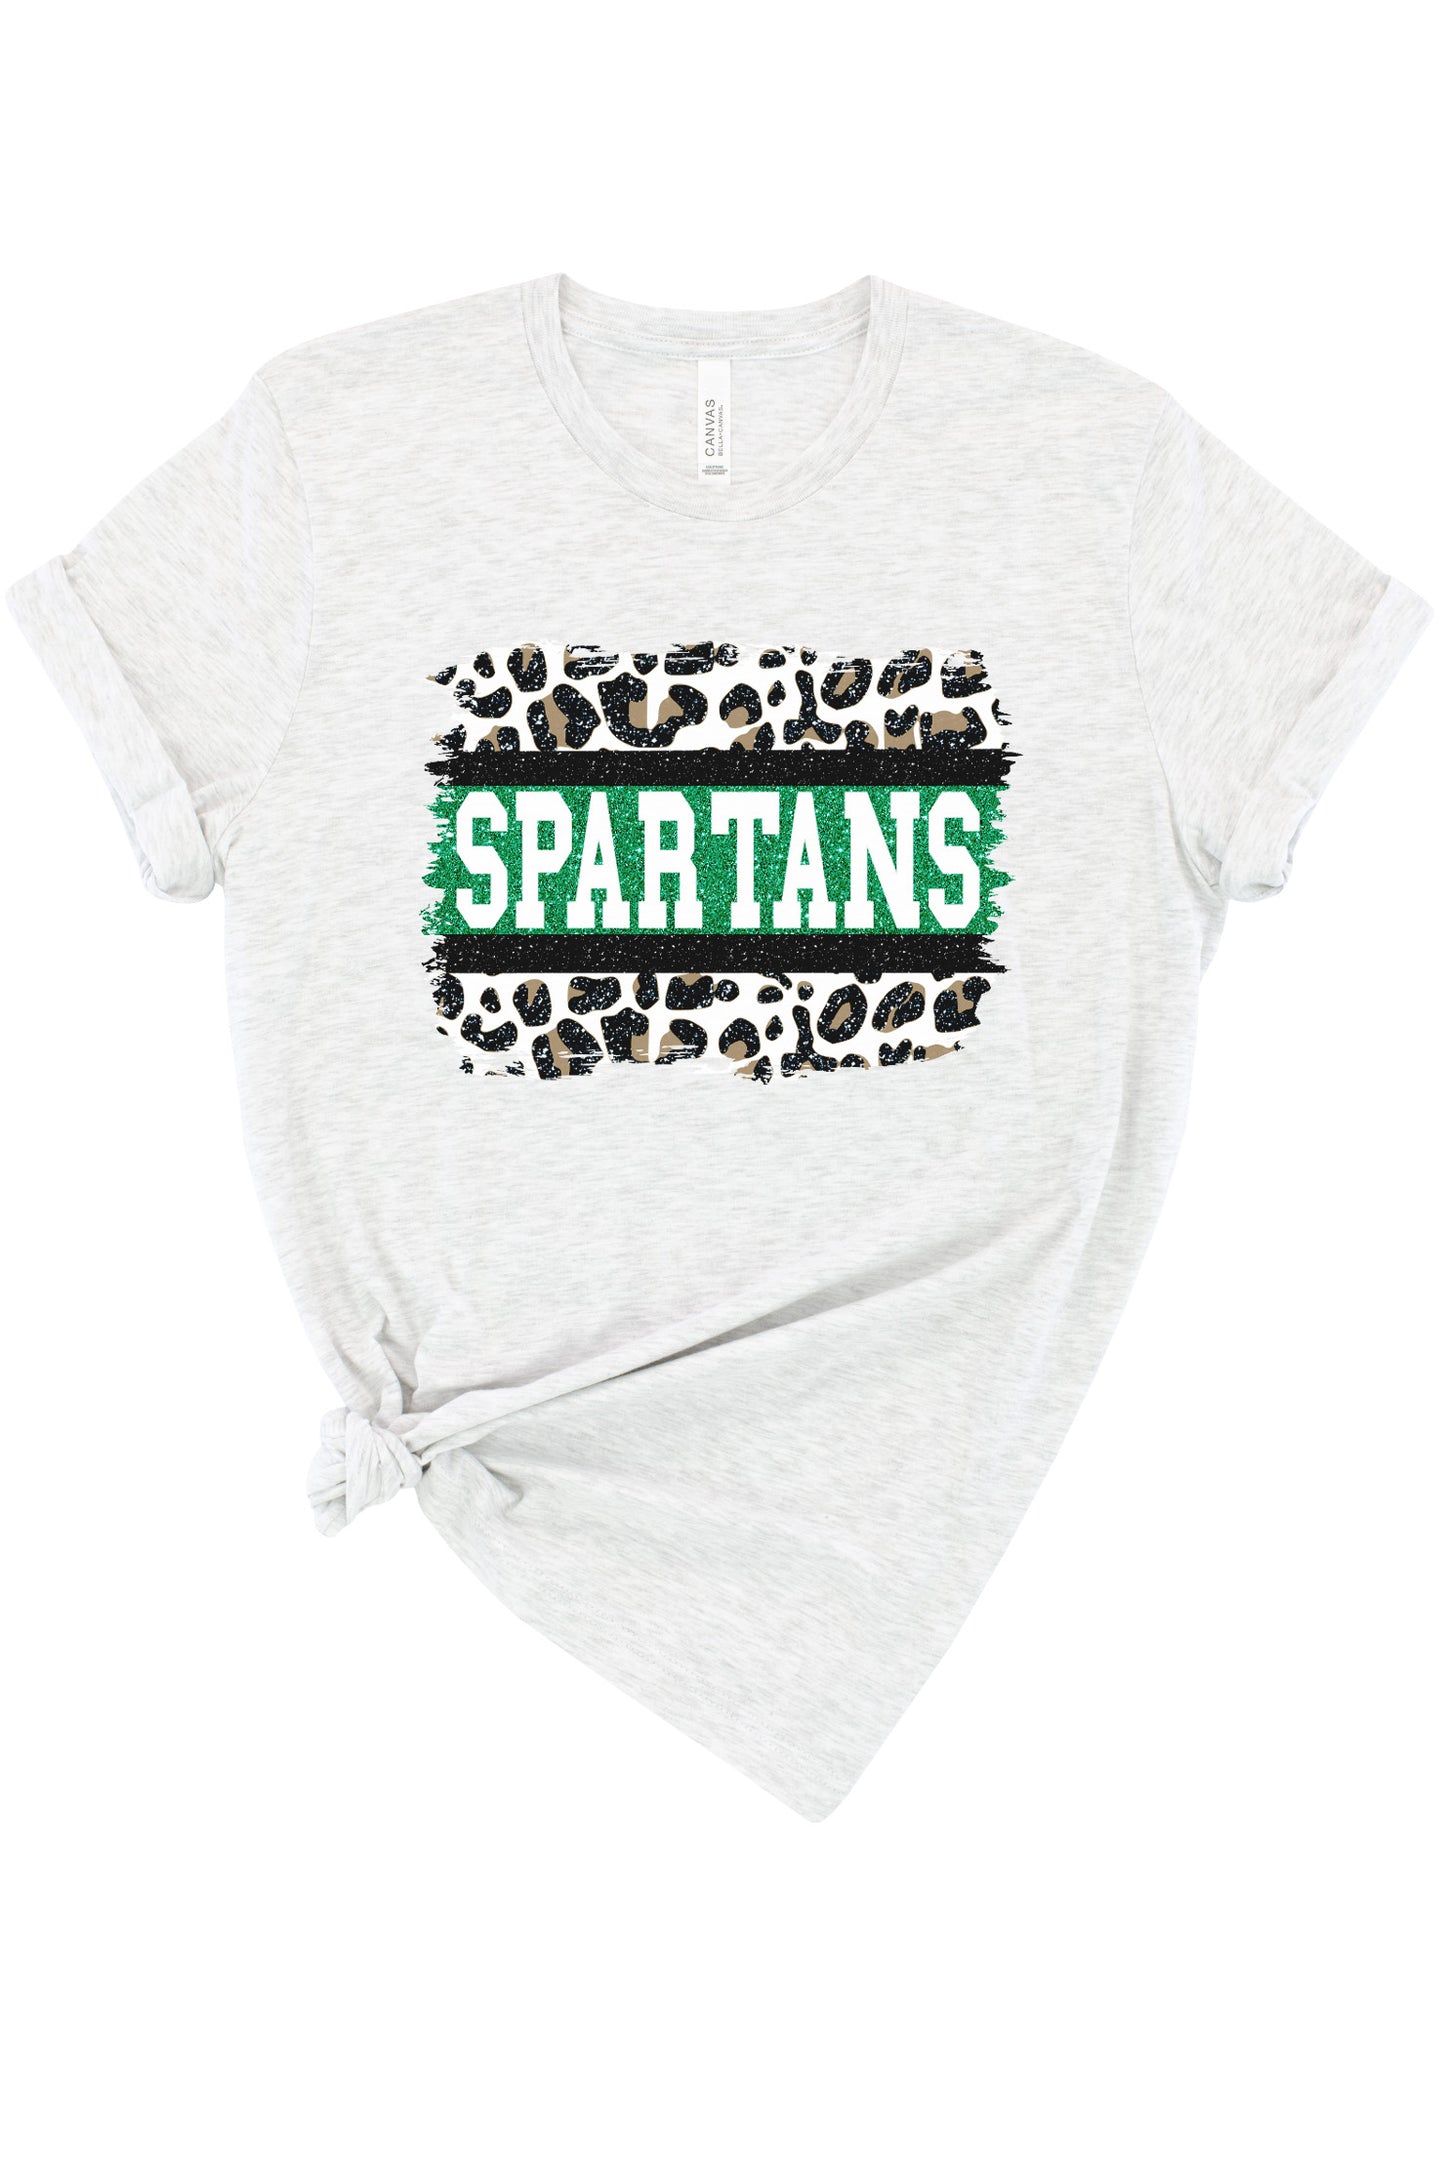 Leopard Spartans Graphic Tee